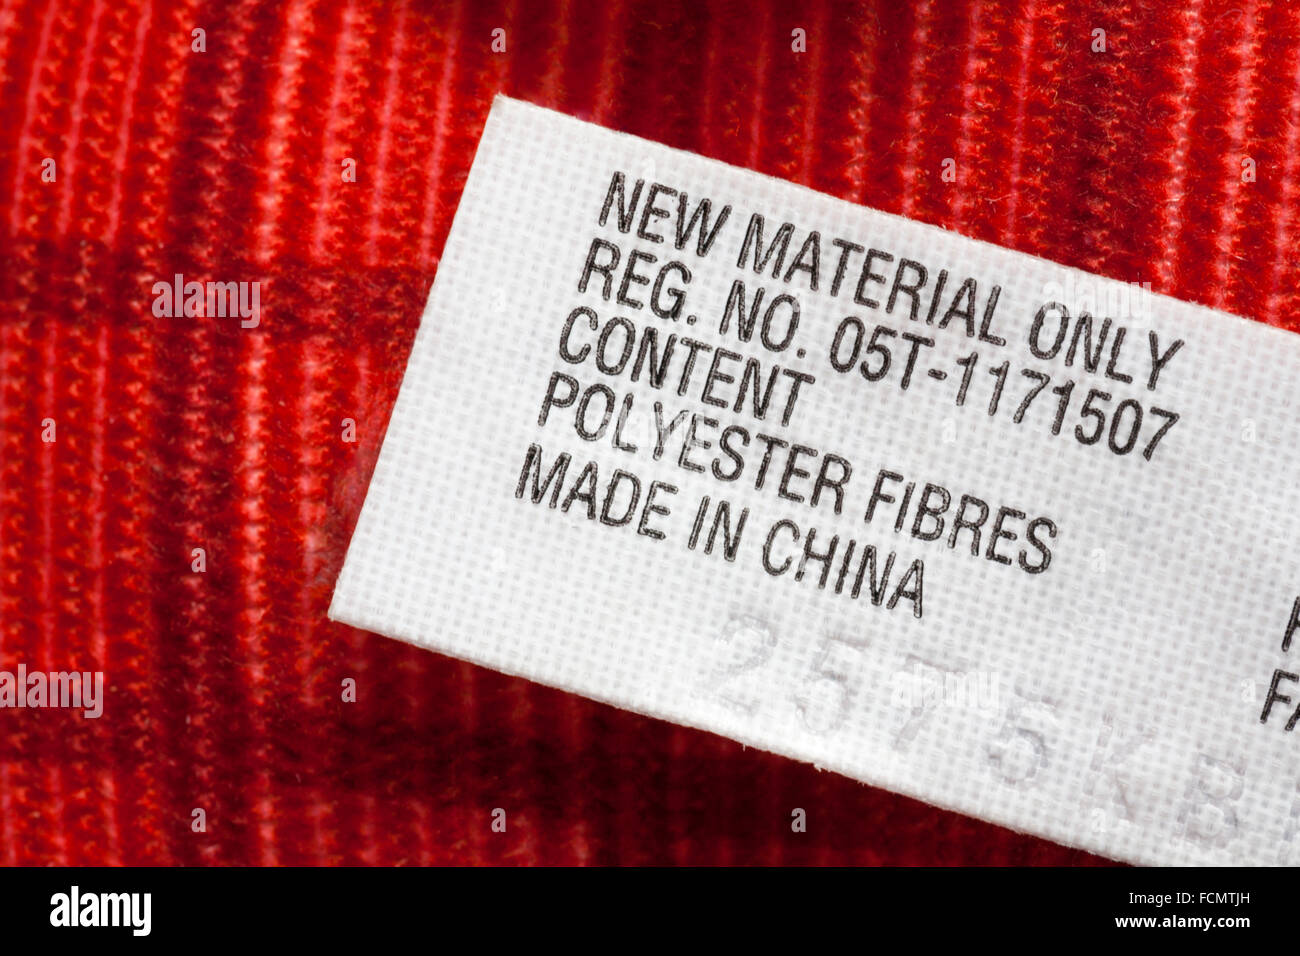 Label Made In China Stock Photos & Label Made In China Stock Images - Alamy